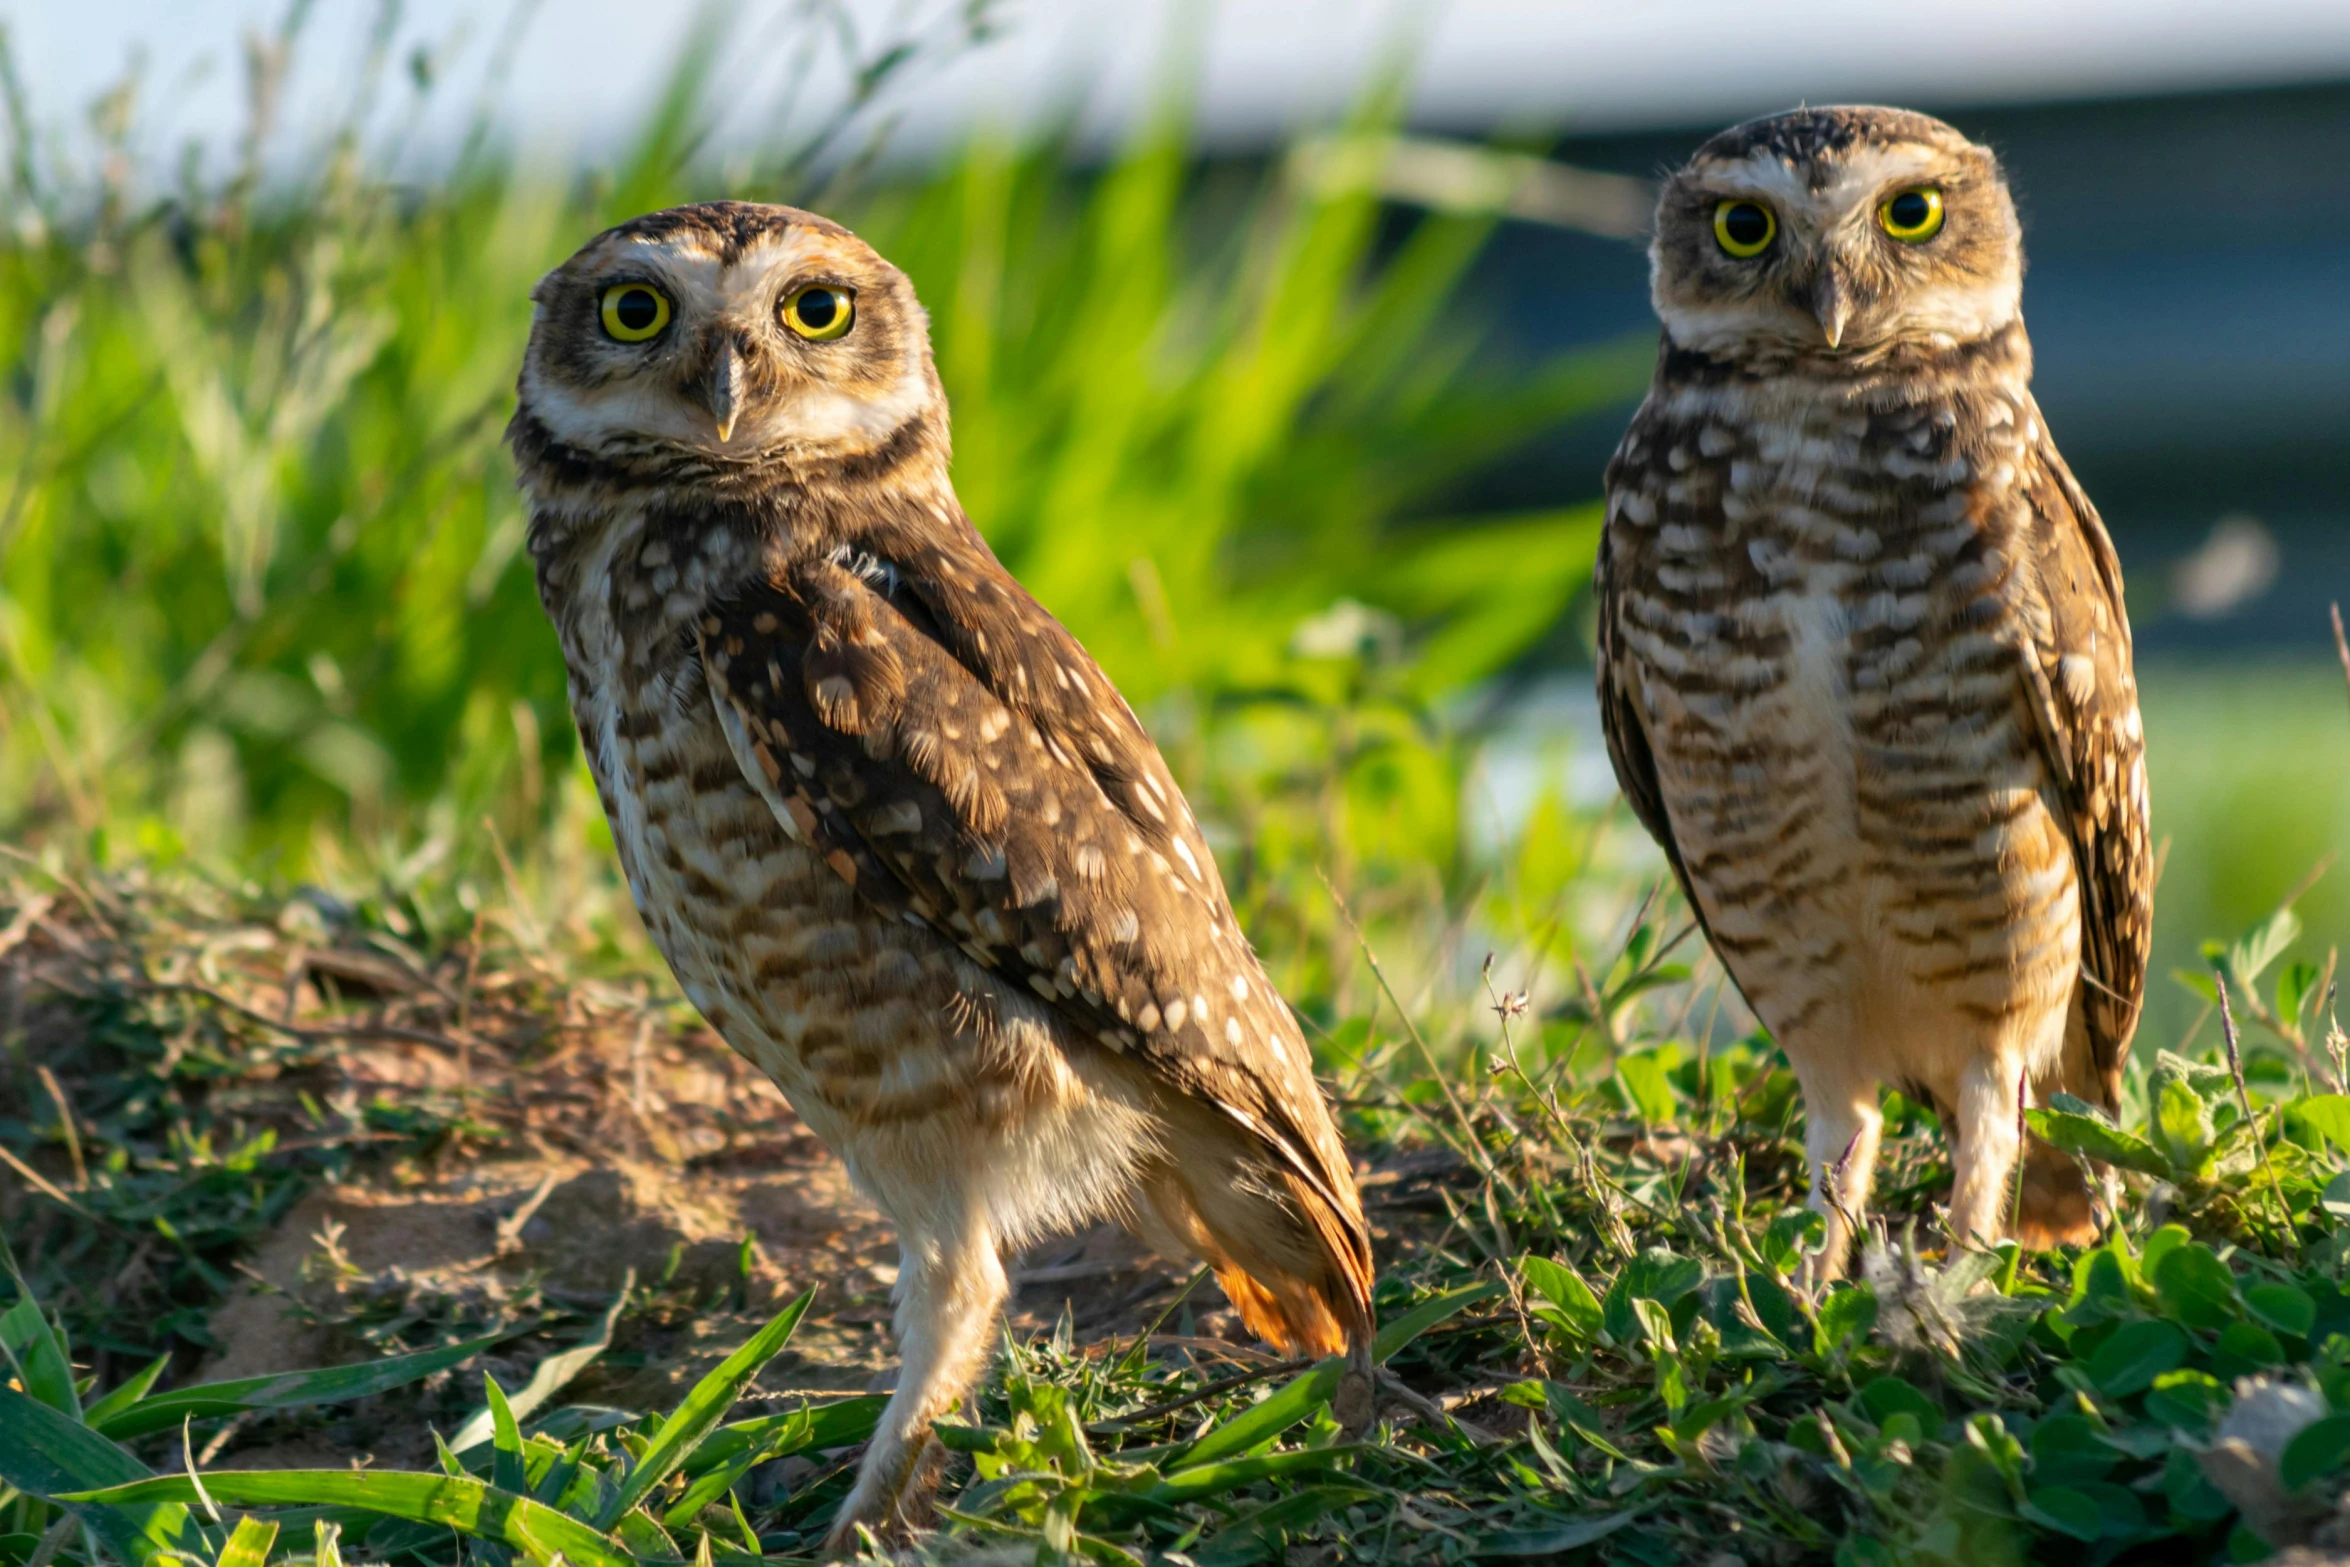 two little owls are standing side by side in the grass